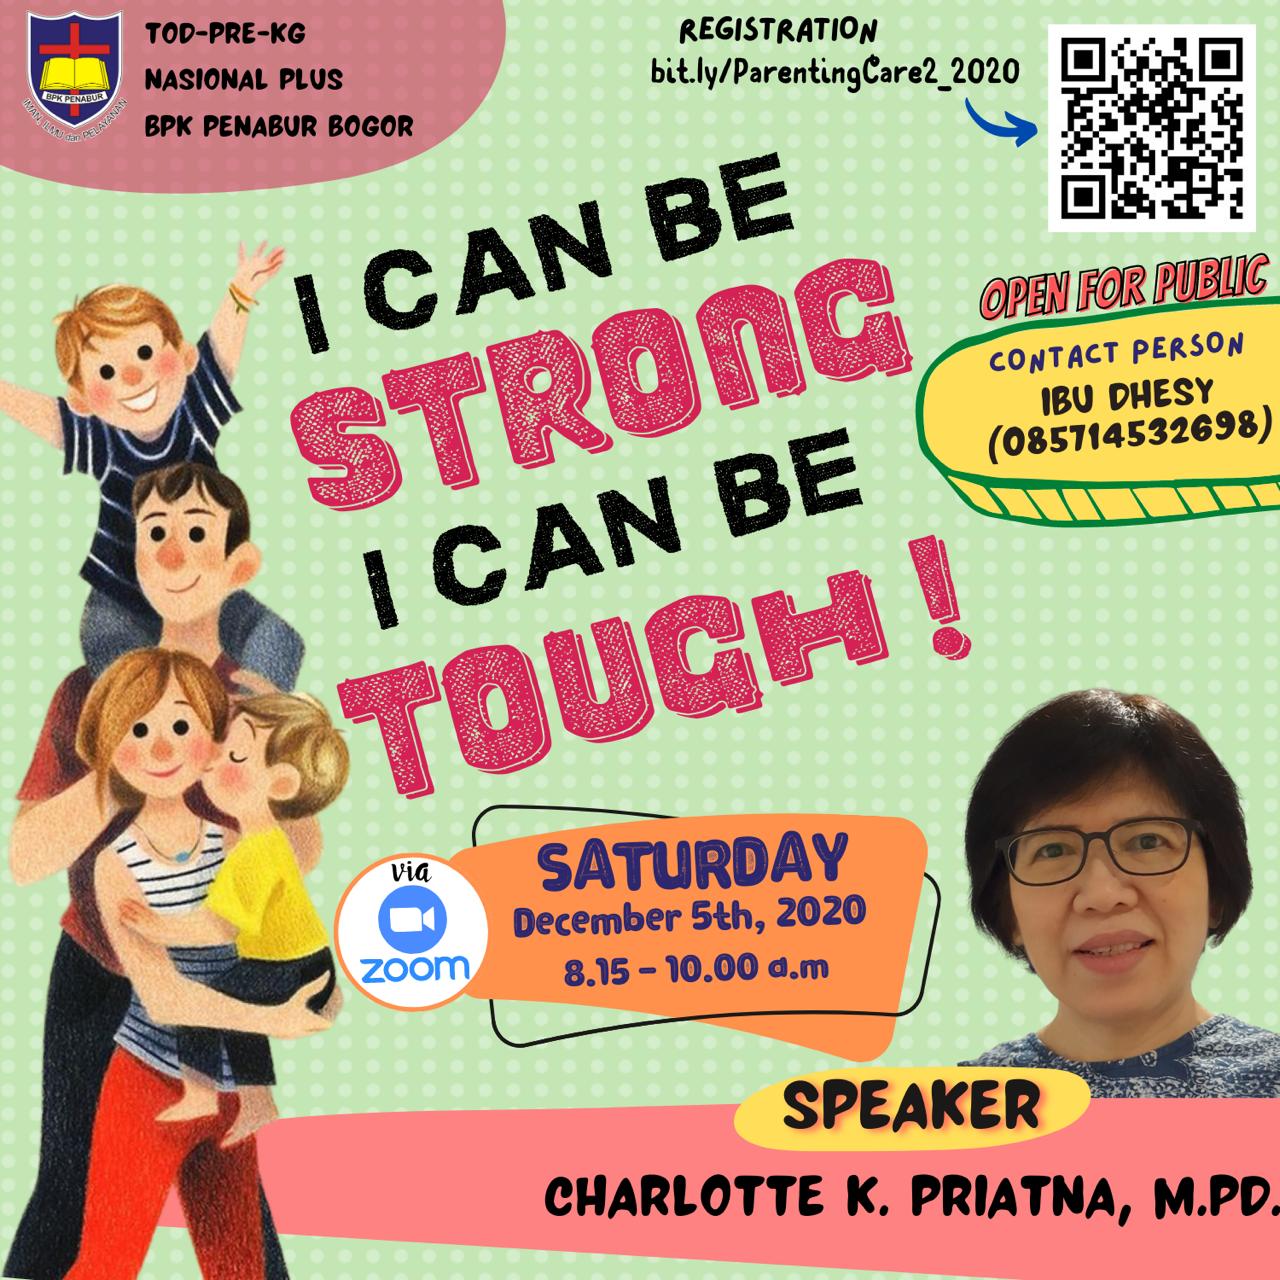 PARENTING CARE ; “I CAN BE STRONG, I CAN BE TOUGH”